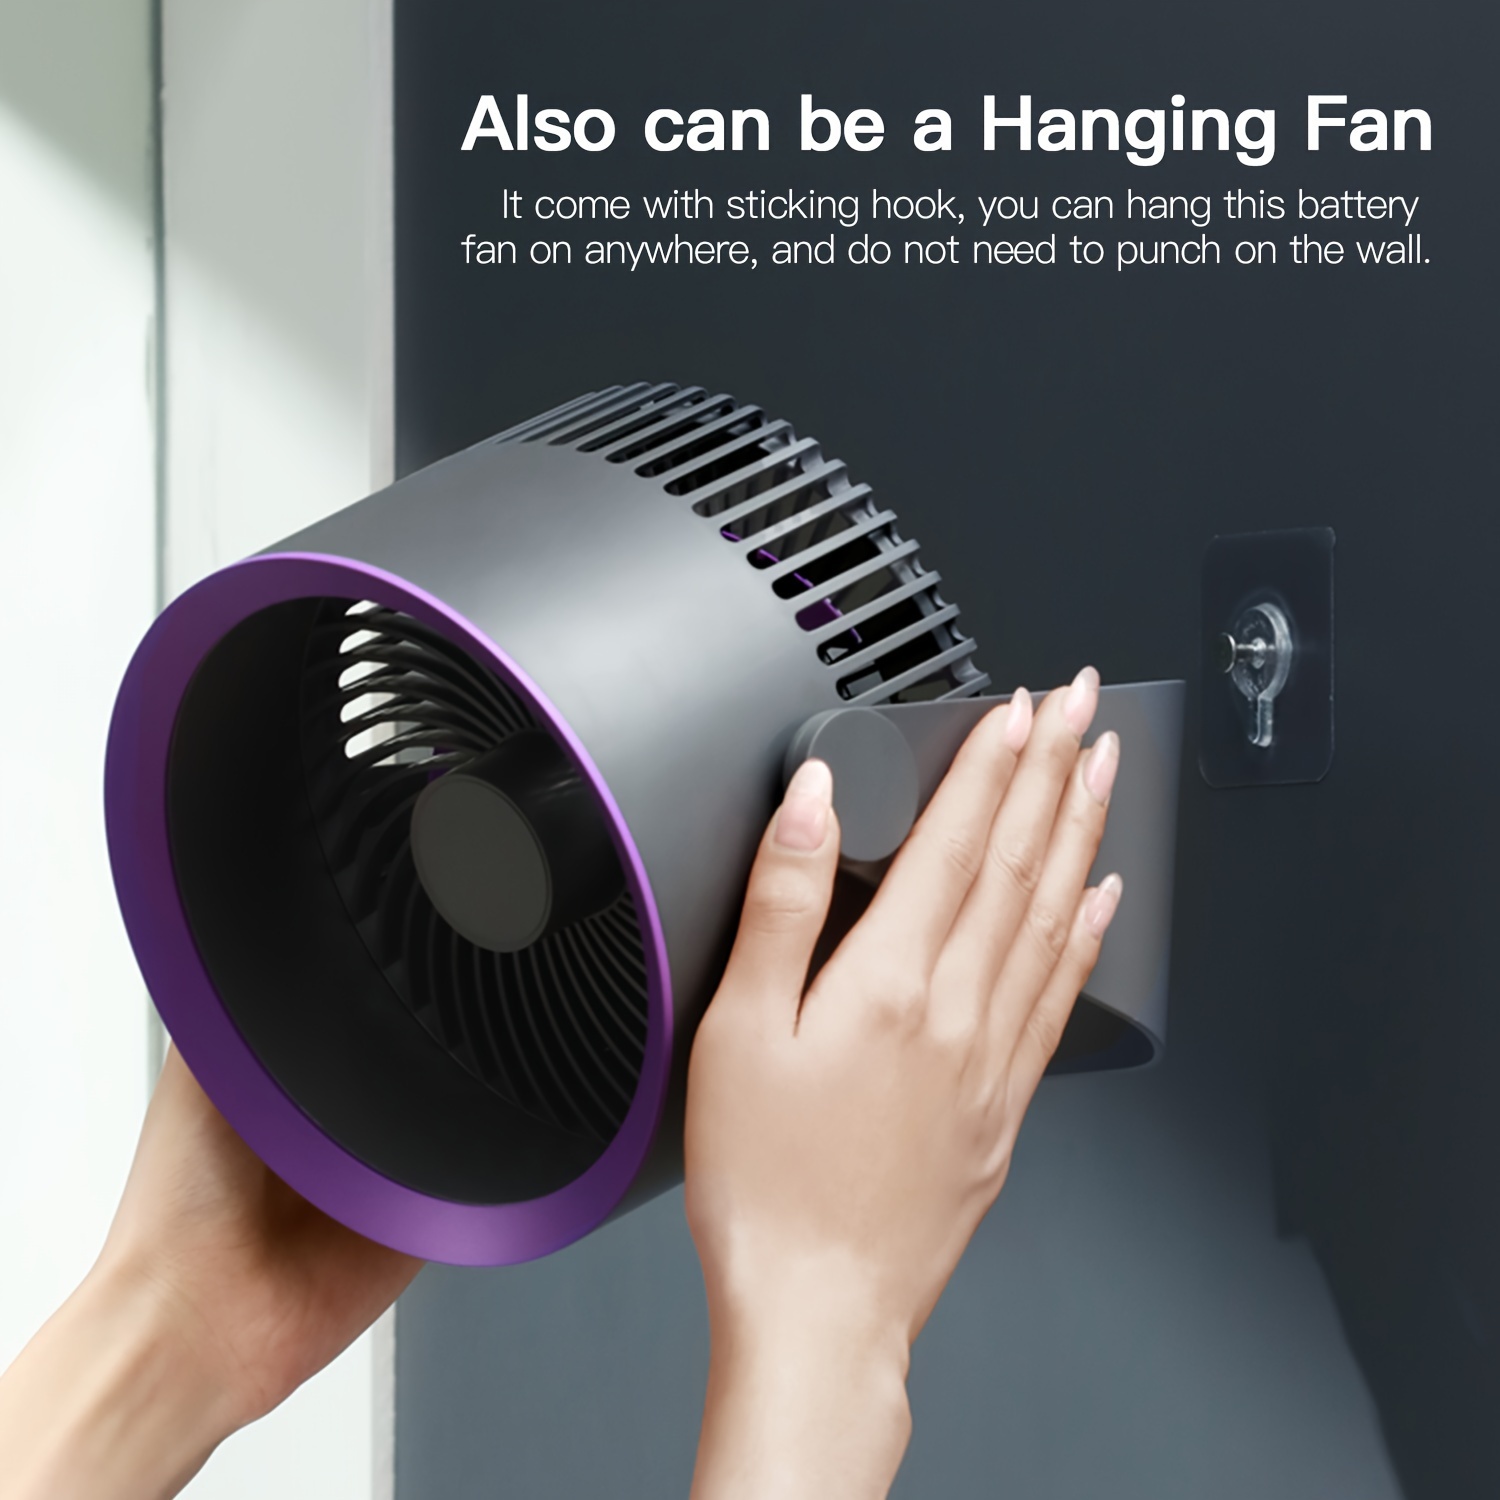 

Table Air Circulator Fan For Home Bedroom, Strong Airflow Fan, 9 Inch, 90° Adjustable Tilt, 3 Speeds Settings, 28db Low Noise, 6000mah Battery Portable Quiet Desk Fan For Office, Kitchen, Home